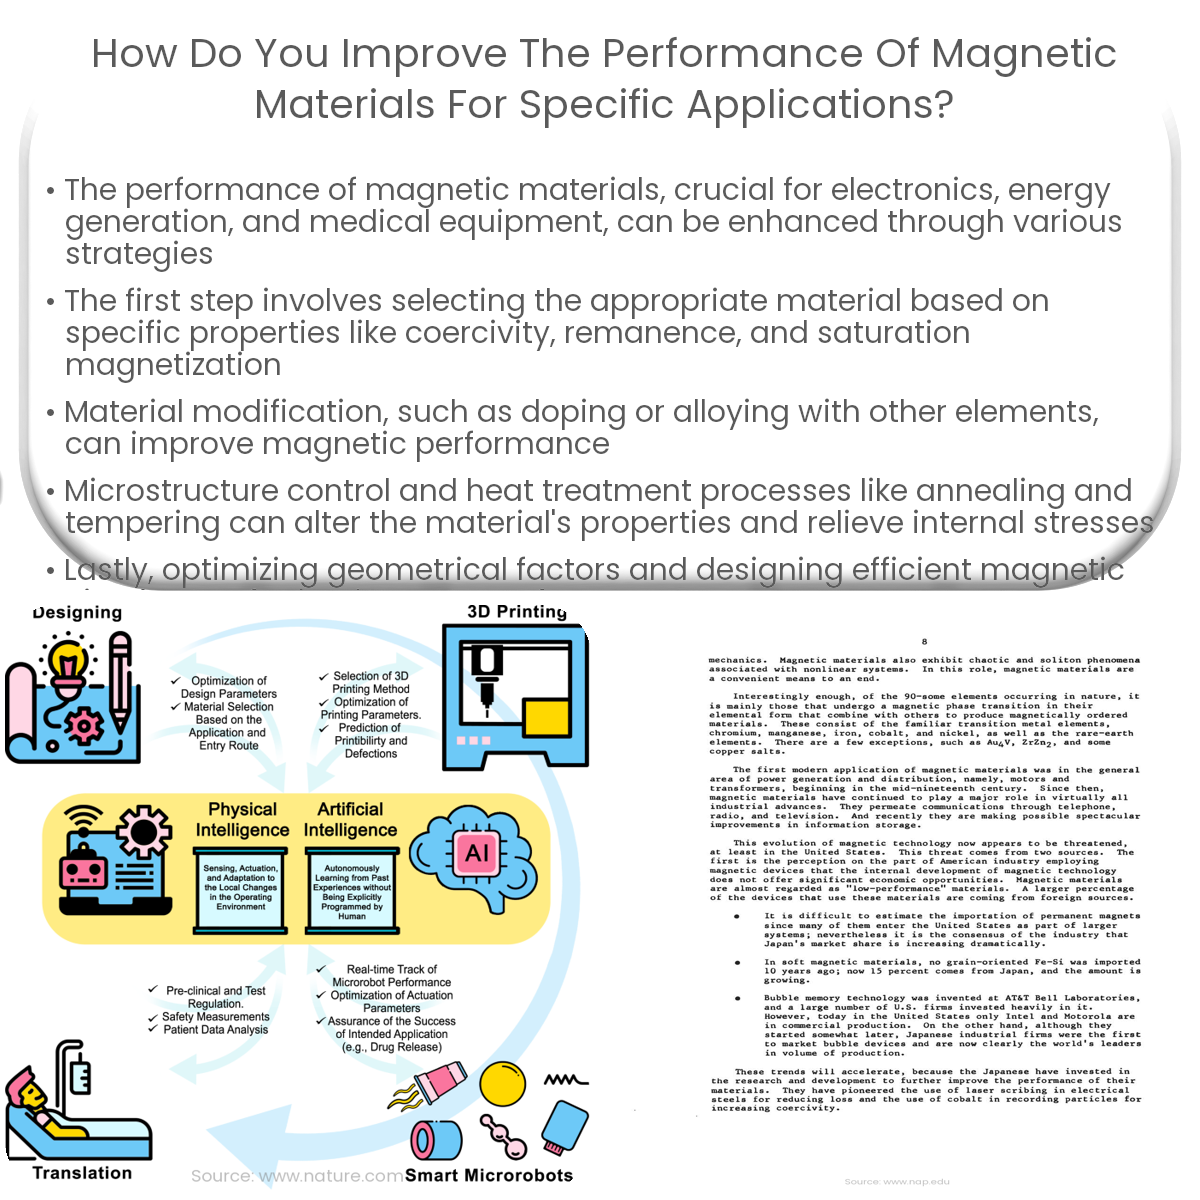 How do you improve the performance of magnetic materials for specific applications?